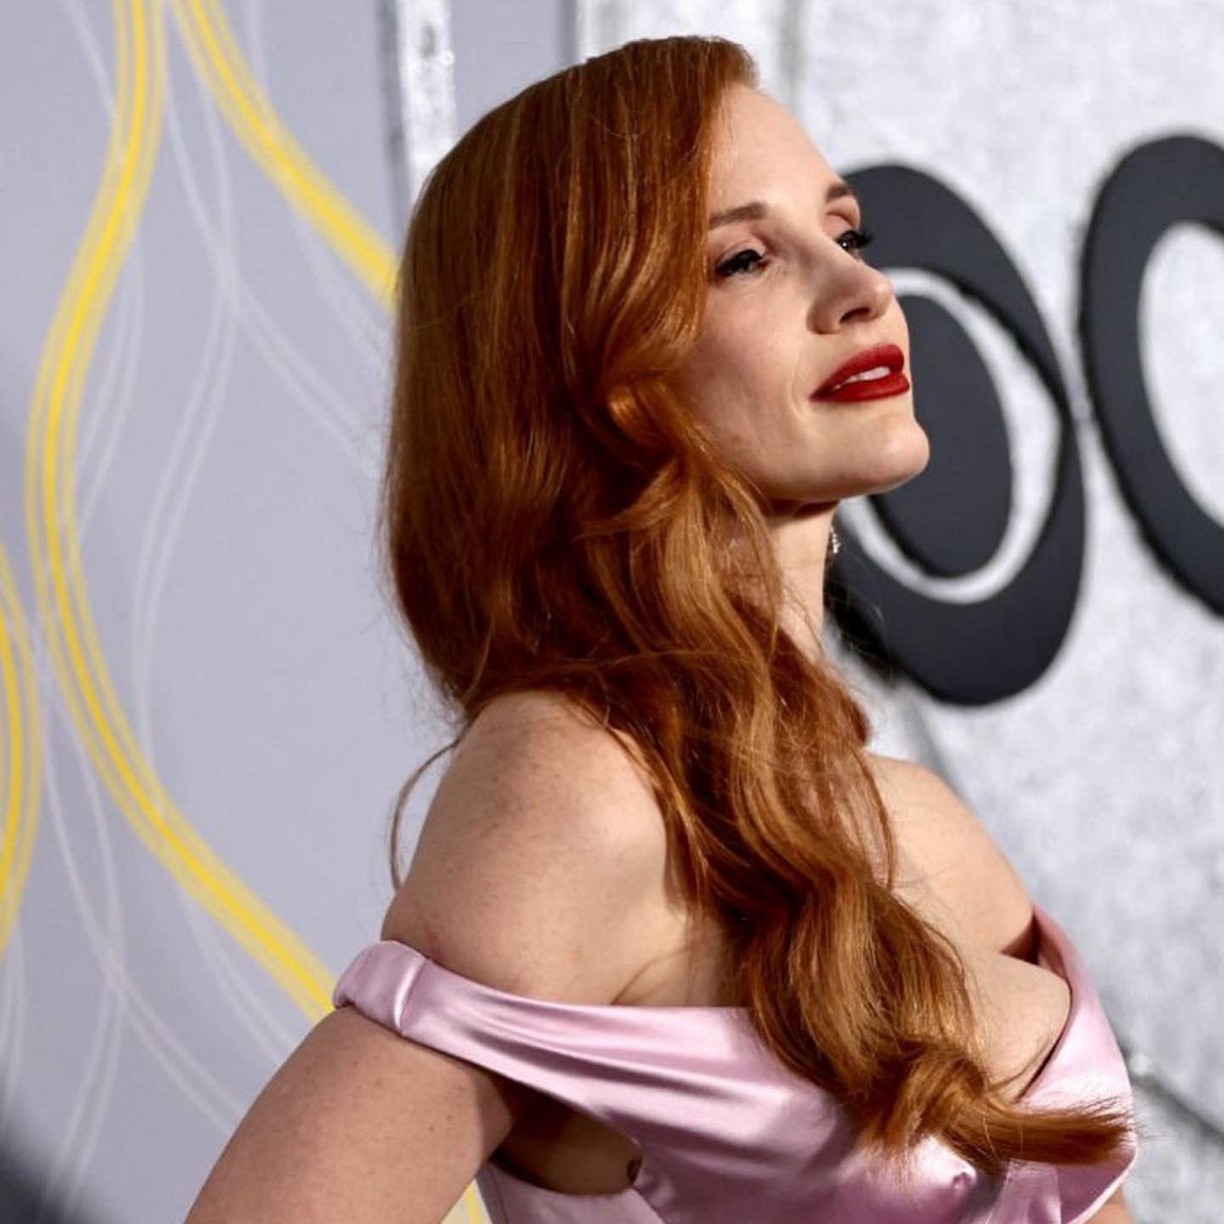 Jessica Chastain Cleavage TheFappening.Pro 14 - Jessica Chastain Cleavage (16 Photos)